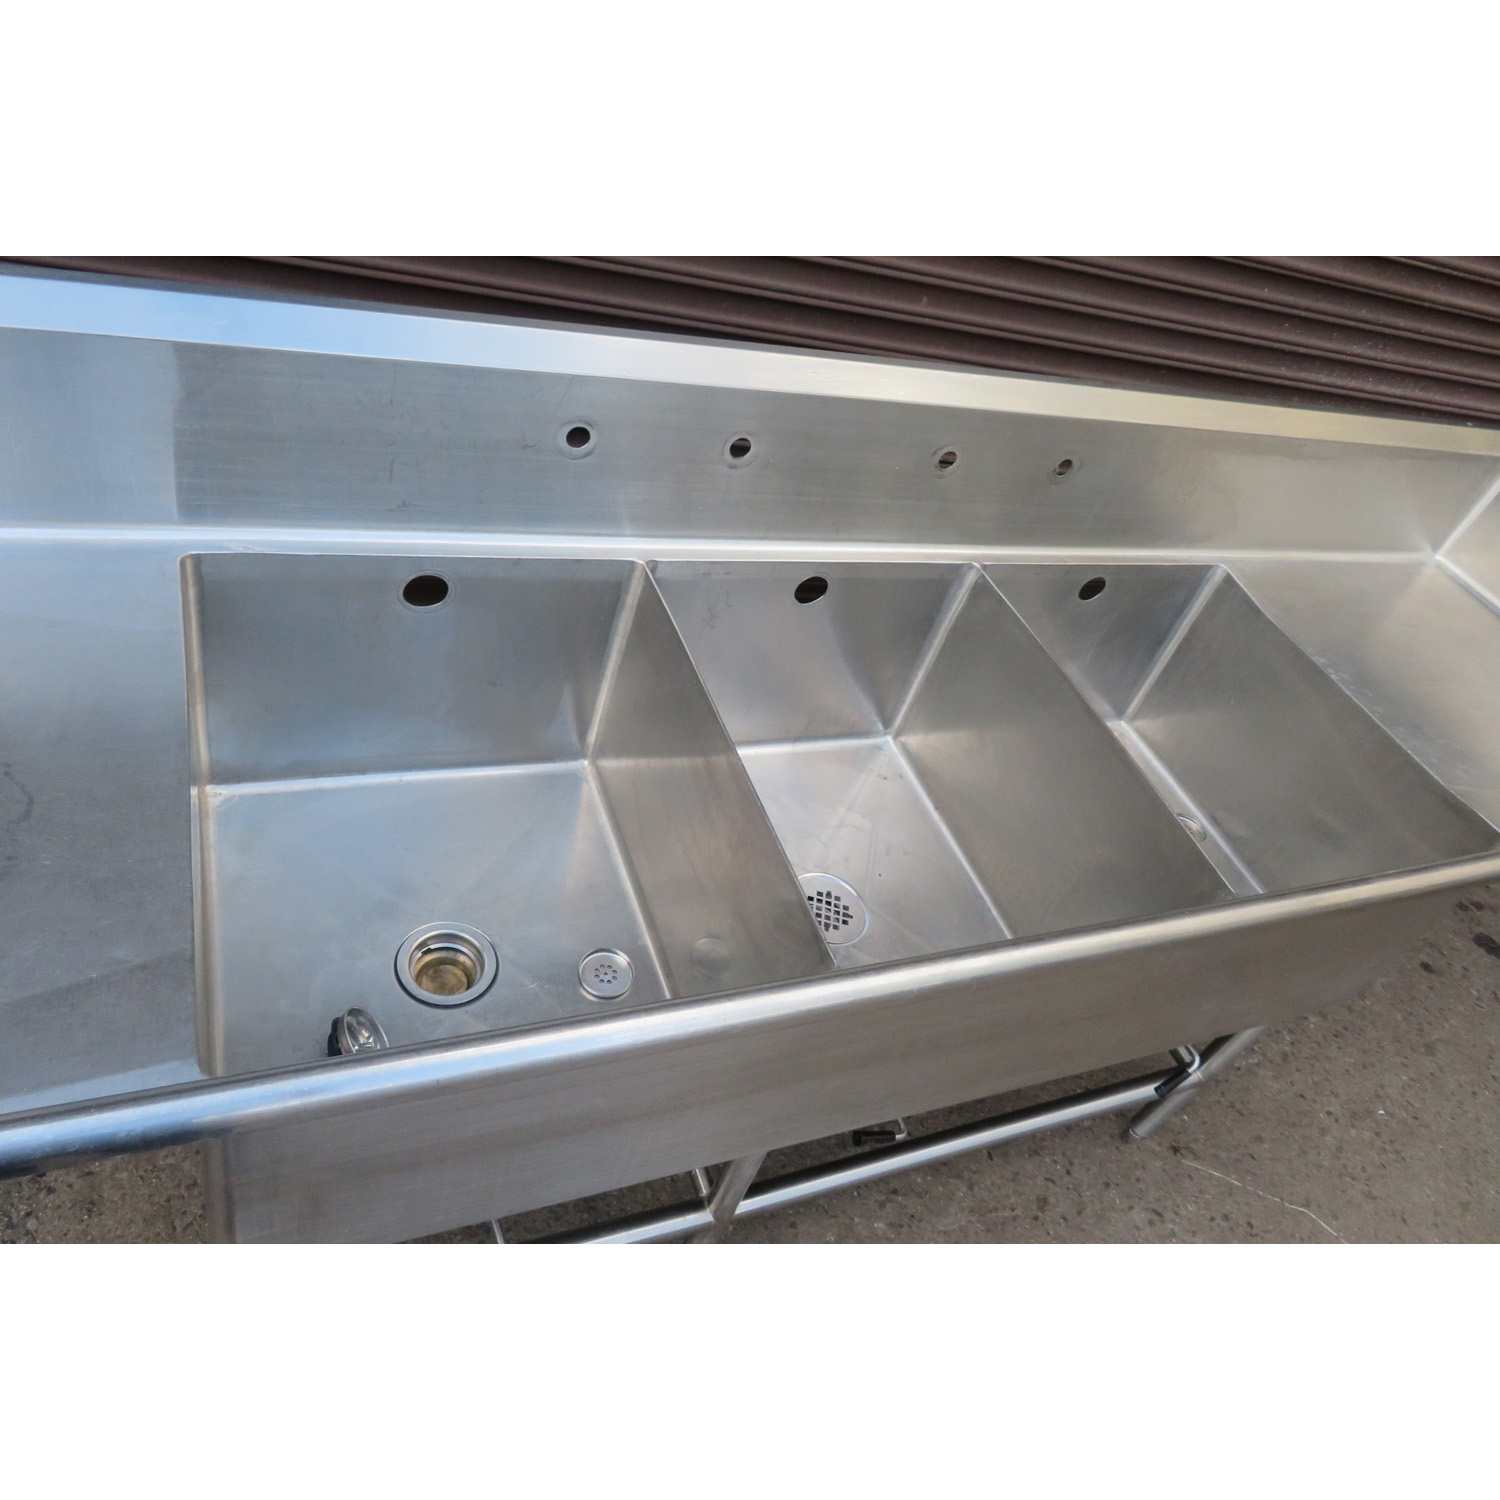 Sink 3 Compartment with 2 Drain Boards, Used Excellent Condition image 1